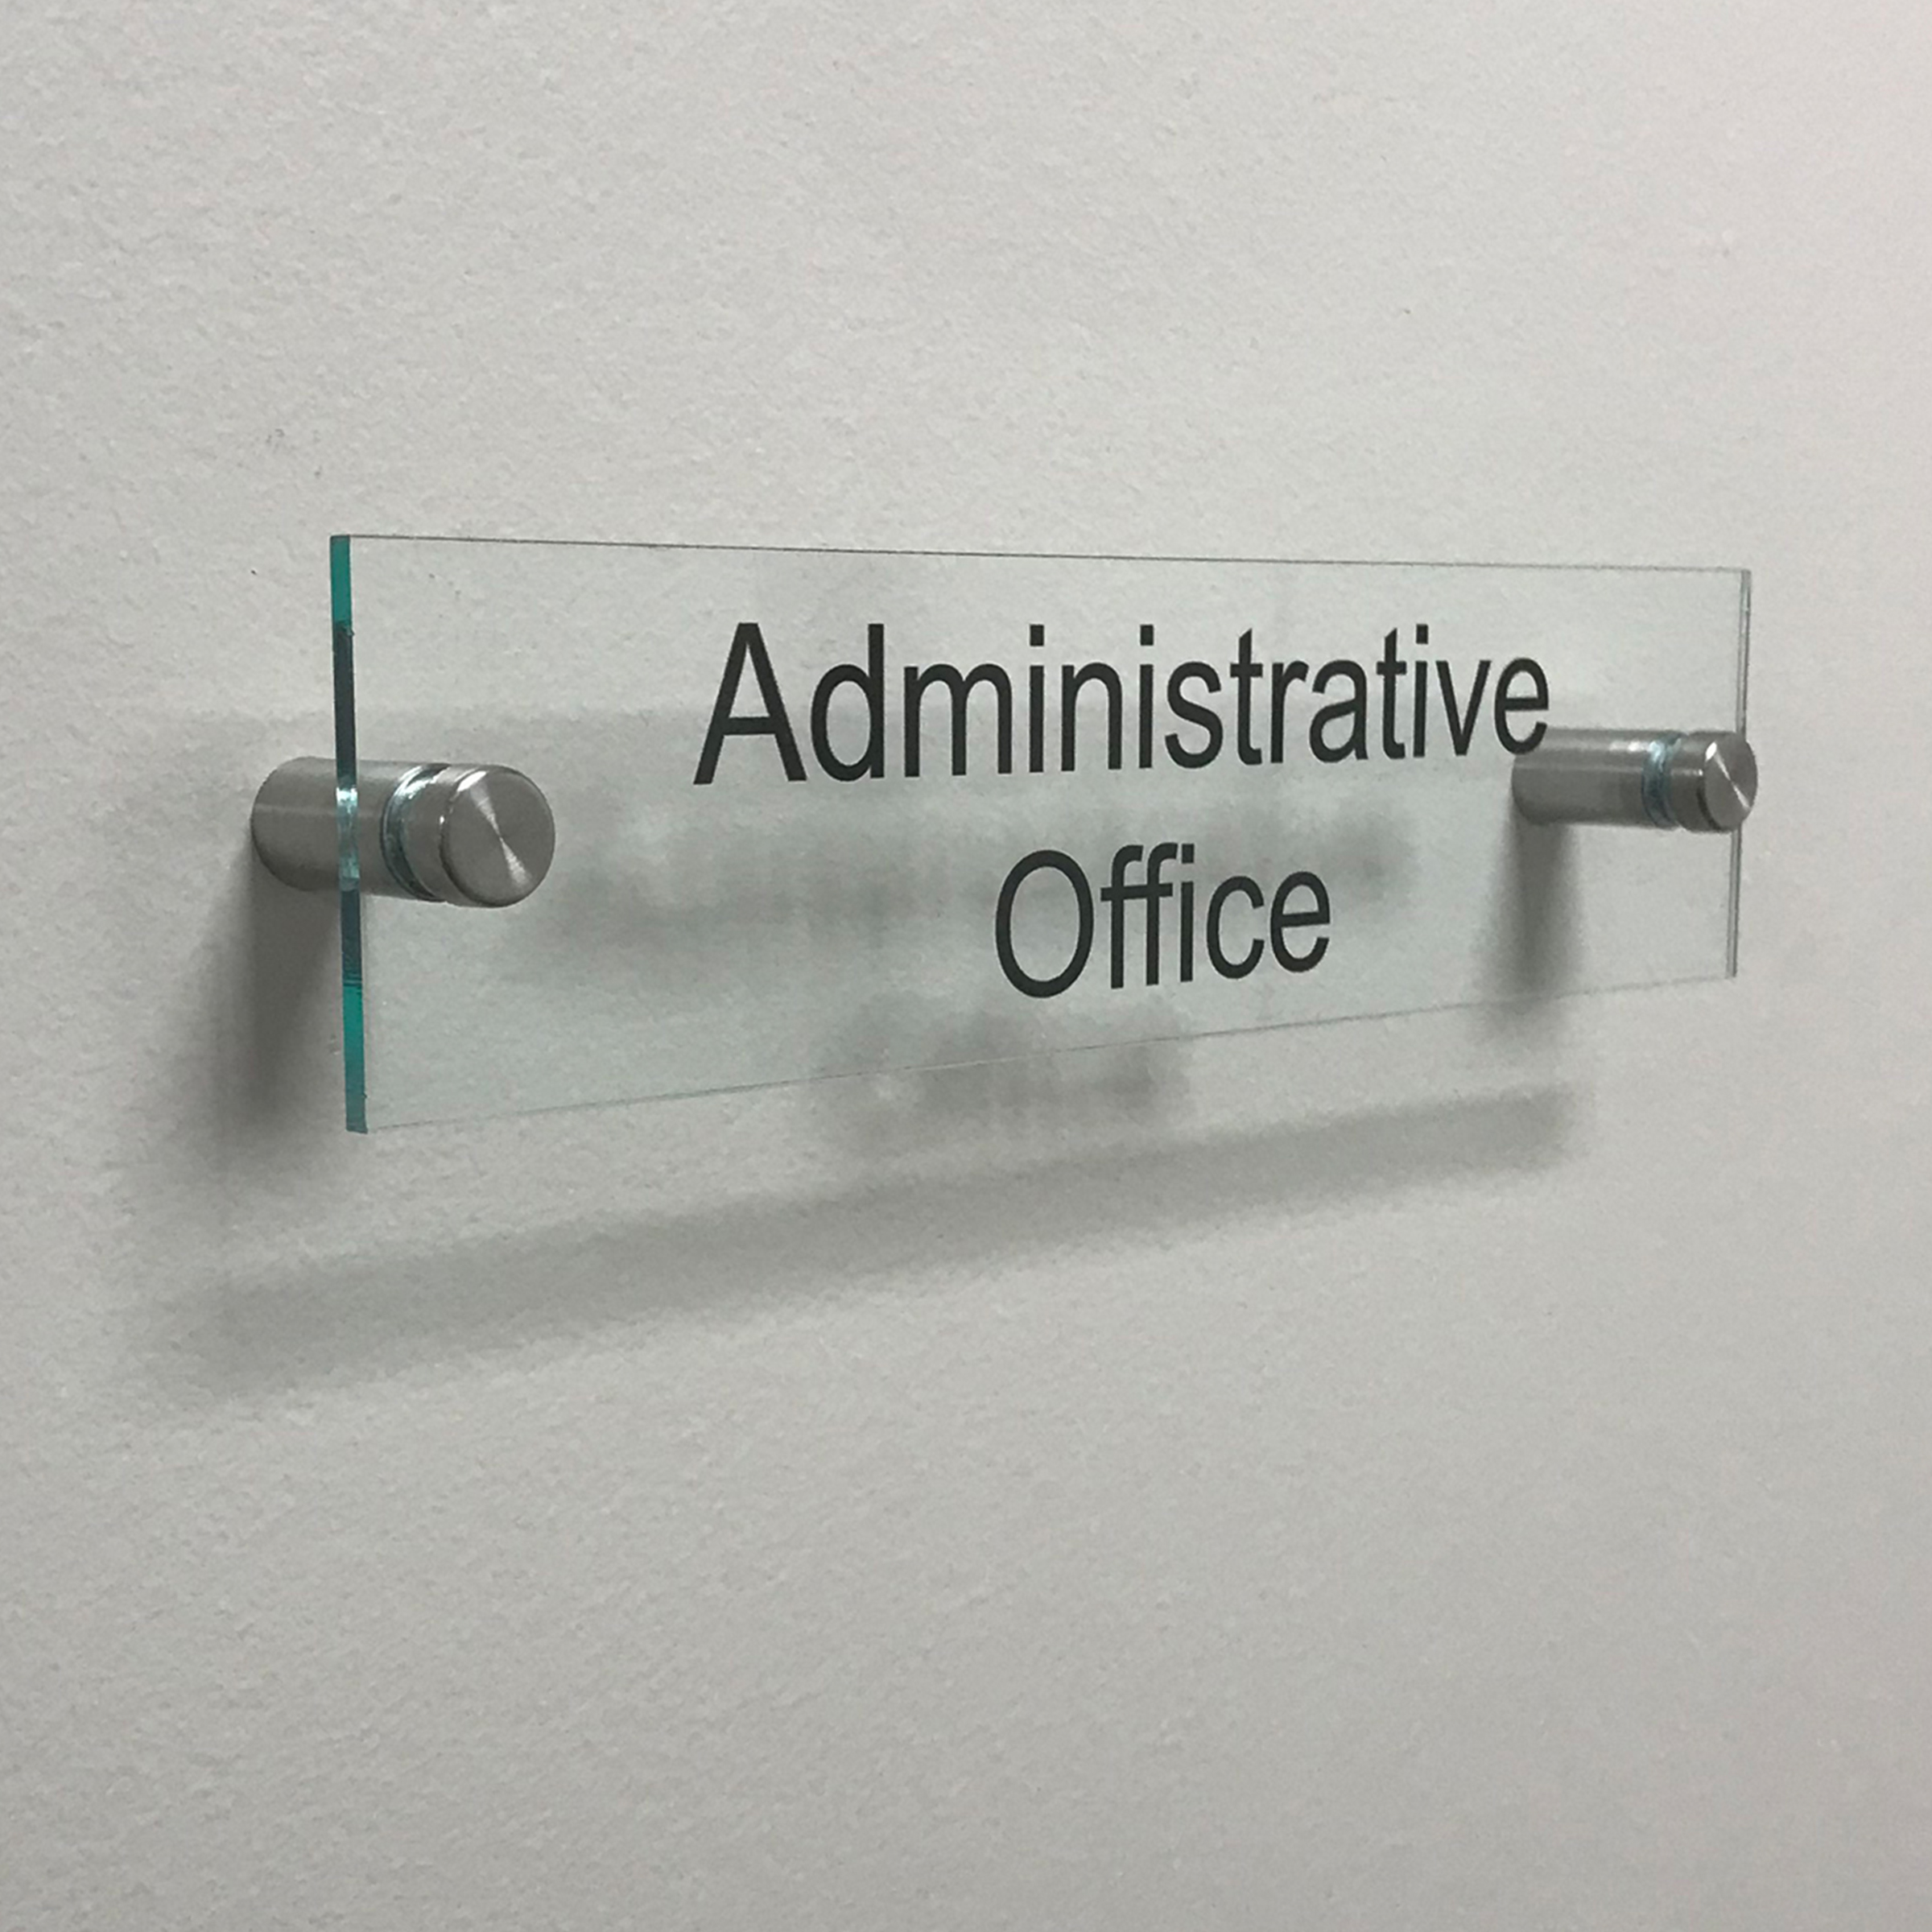 Administrative Office Door Sign. Clearly label every room in your